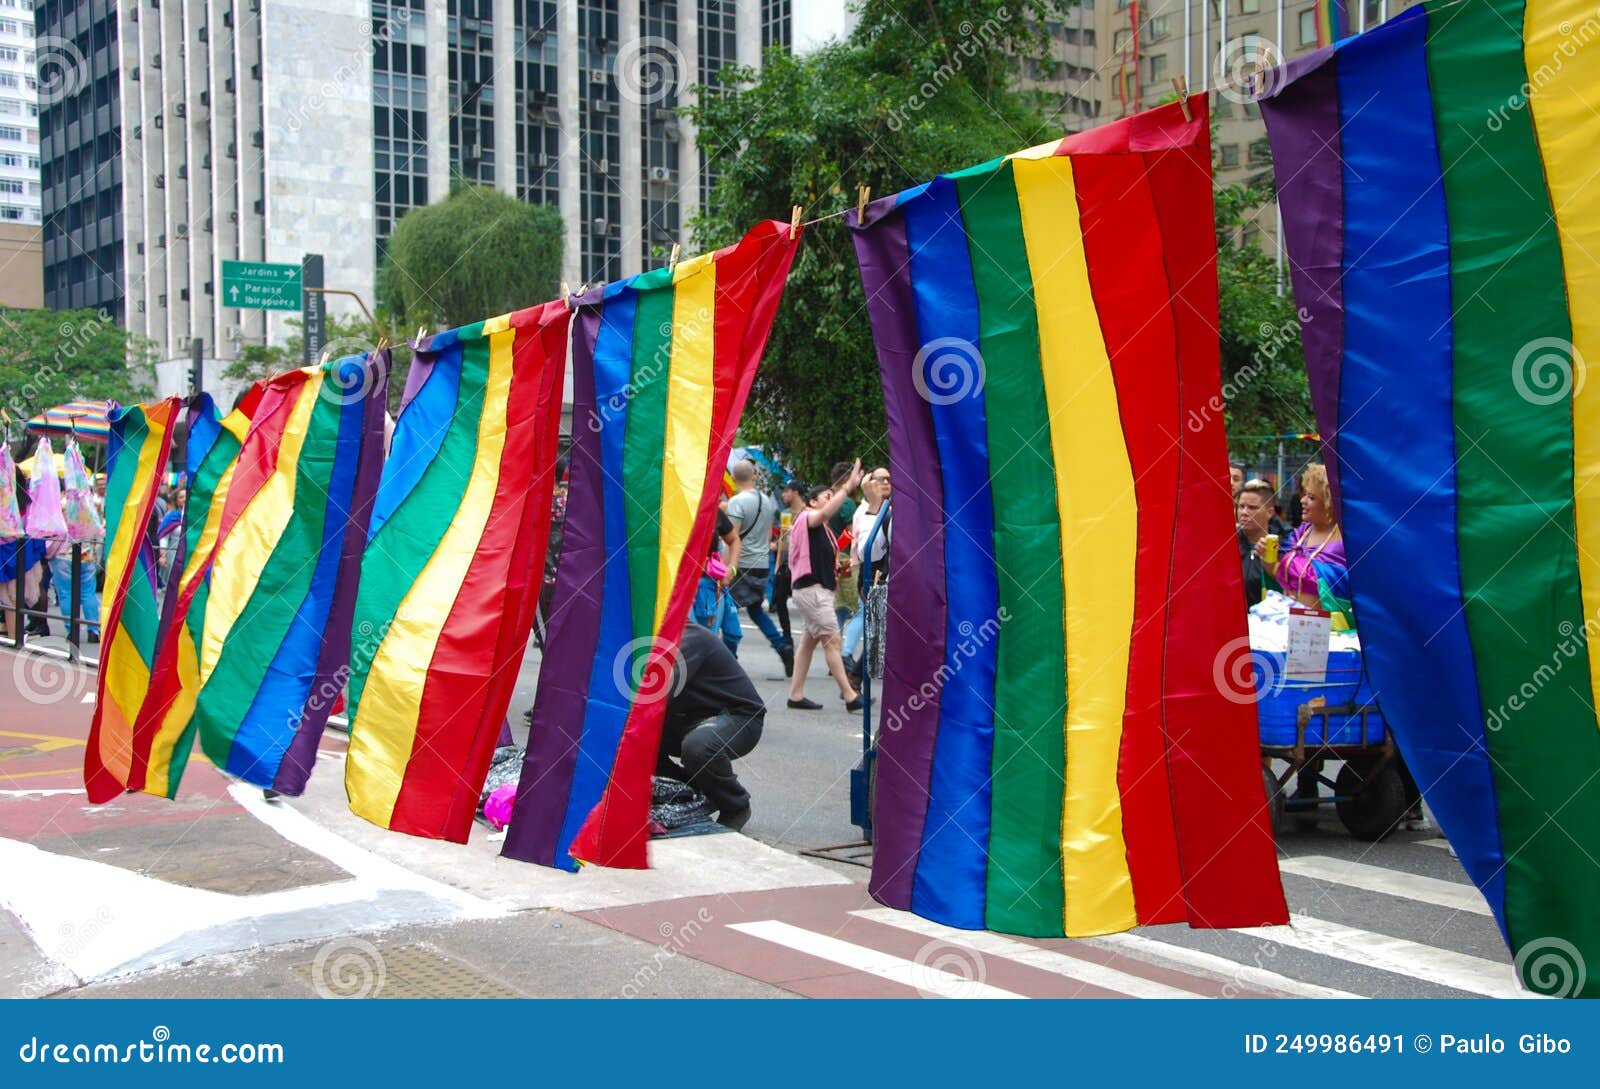 Lgbtqi Flags On Avenida Paulista On The Day Of The Gay Parade Symbolizing The Cause Of Freedom